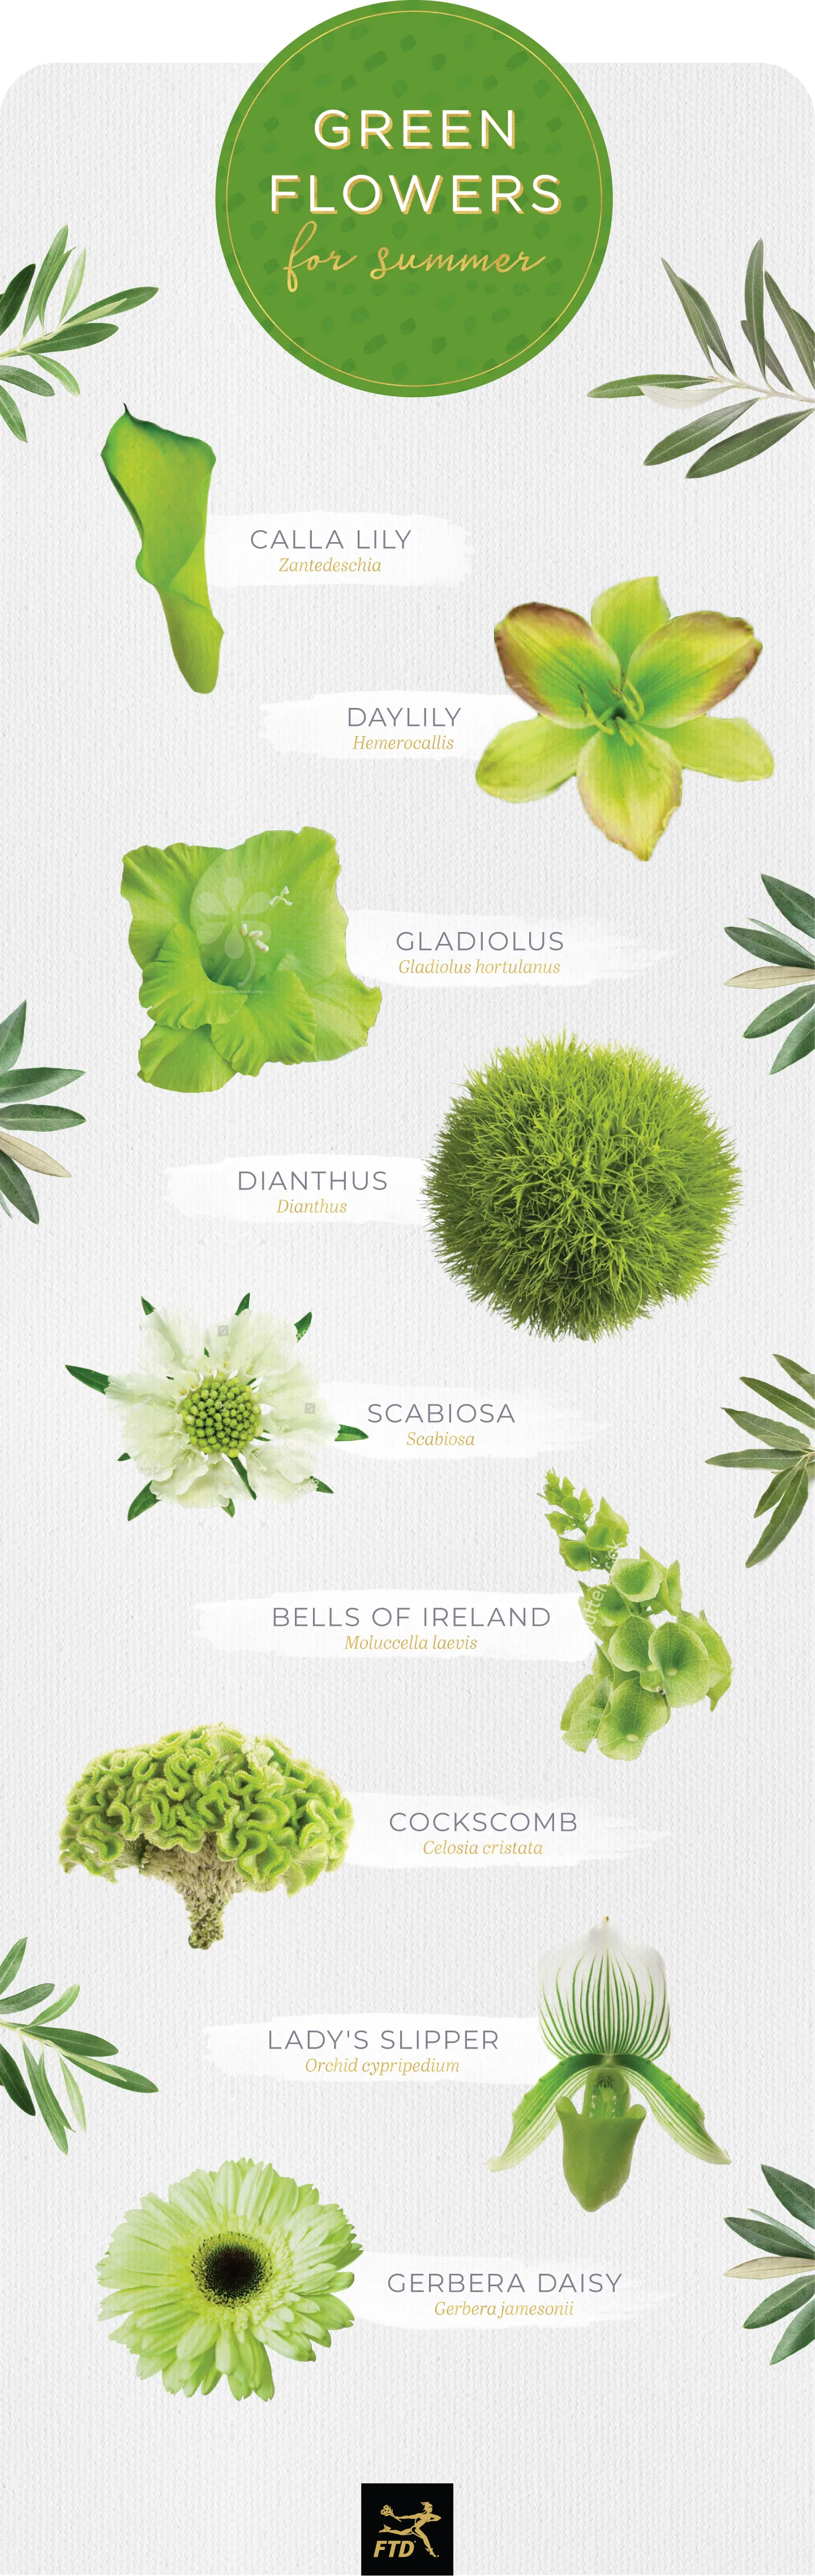 20 Types of Green Flowers